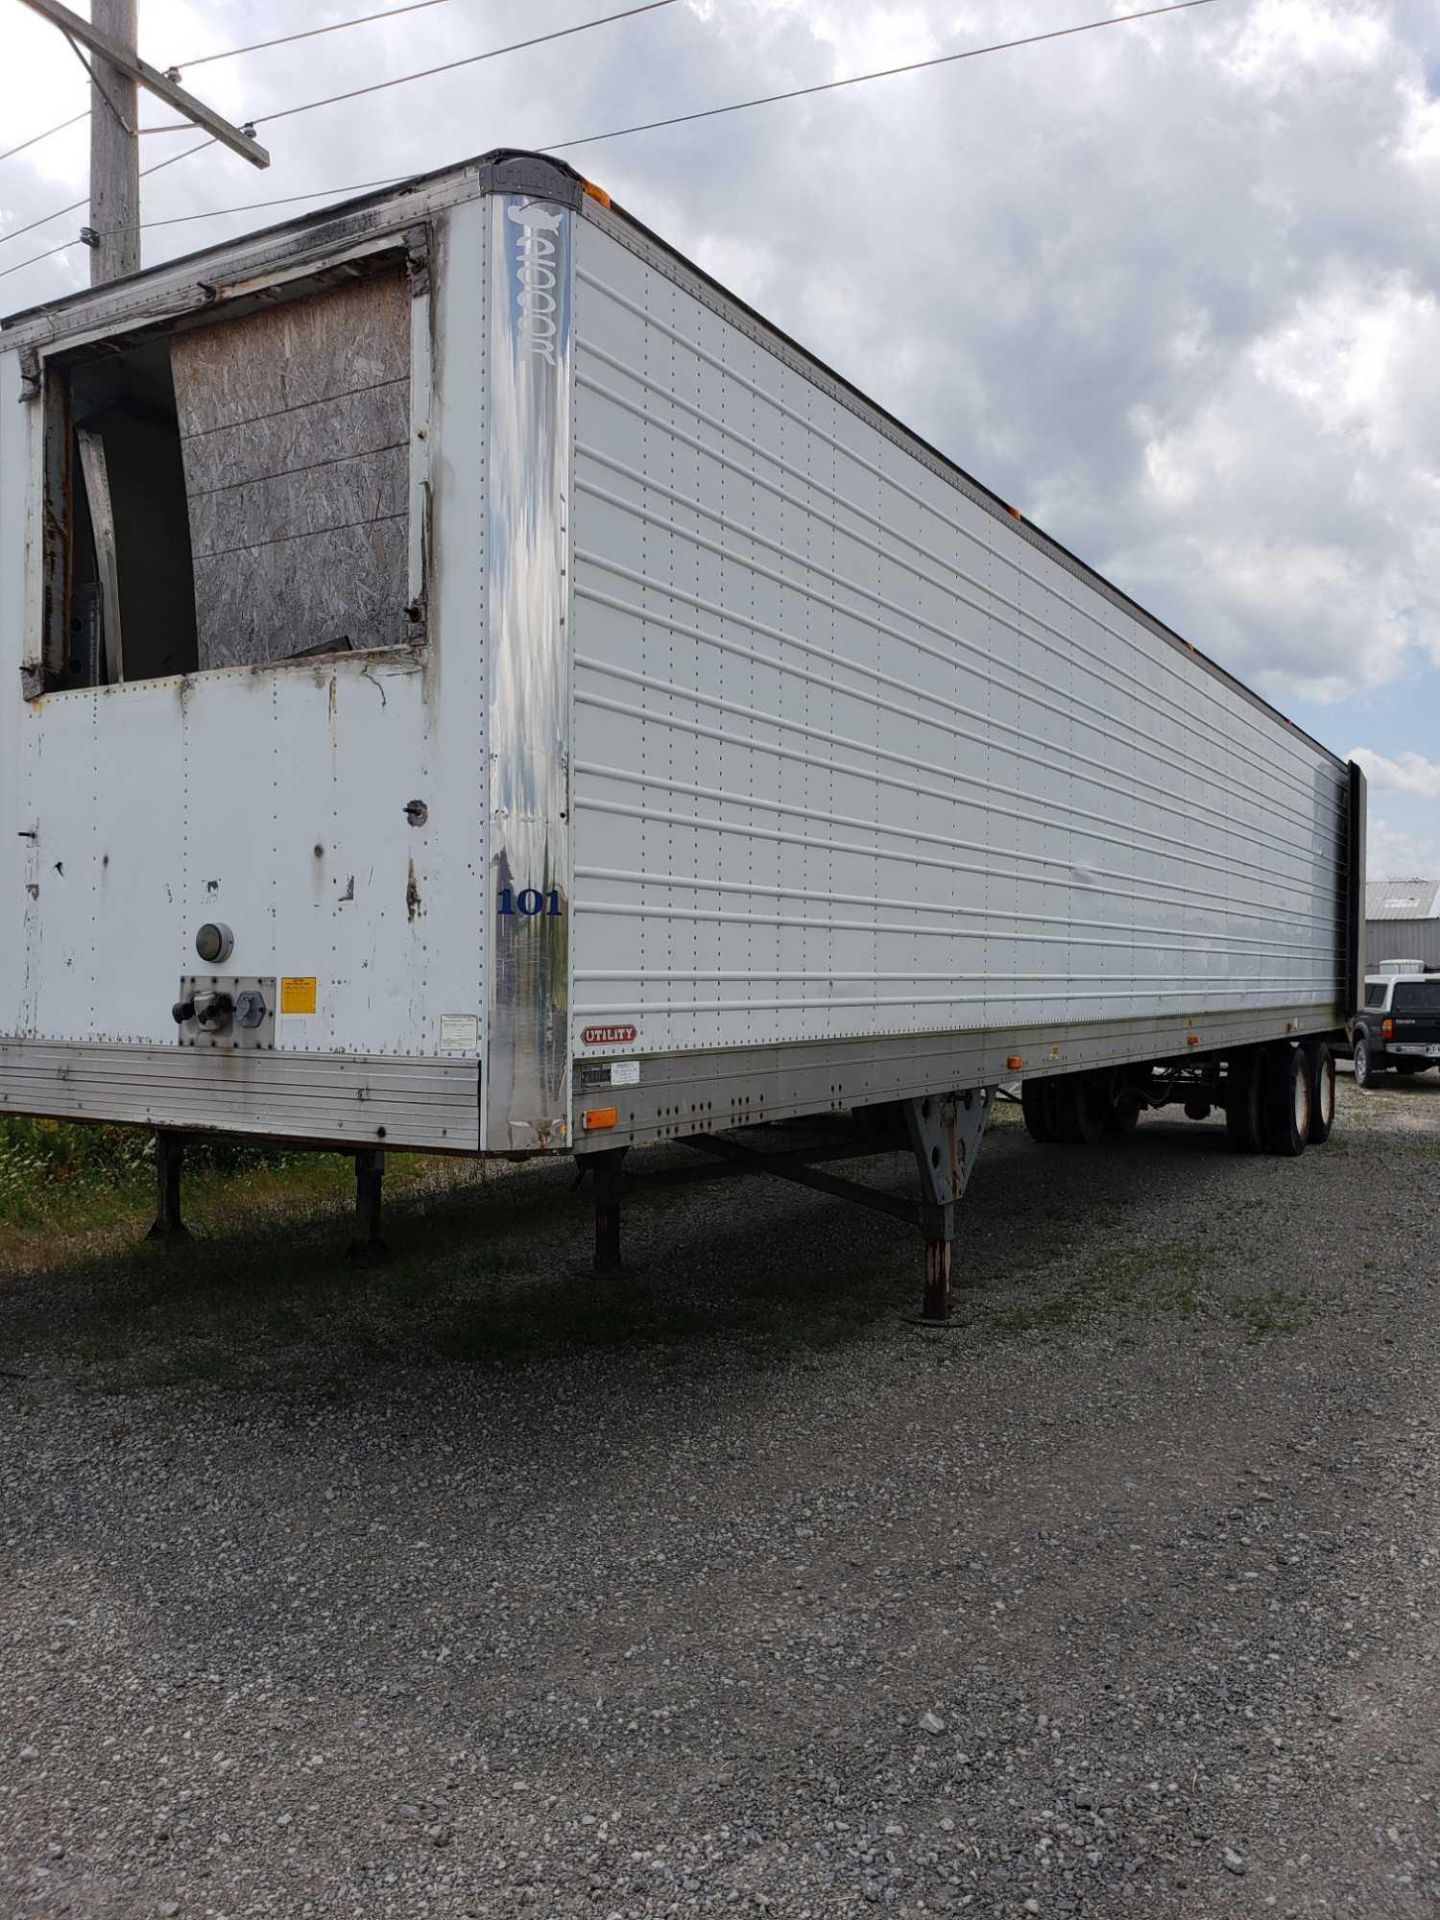 1991 Utility Trailer Company 53" trailer. VIN 1UYVS2480NM655711. Trailer is titled. No reefer unit. - Image 4 of 15